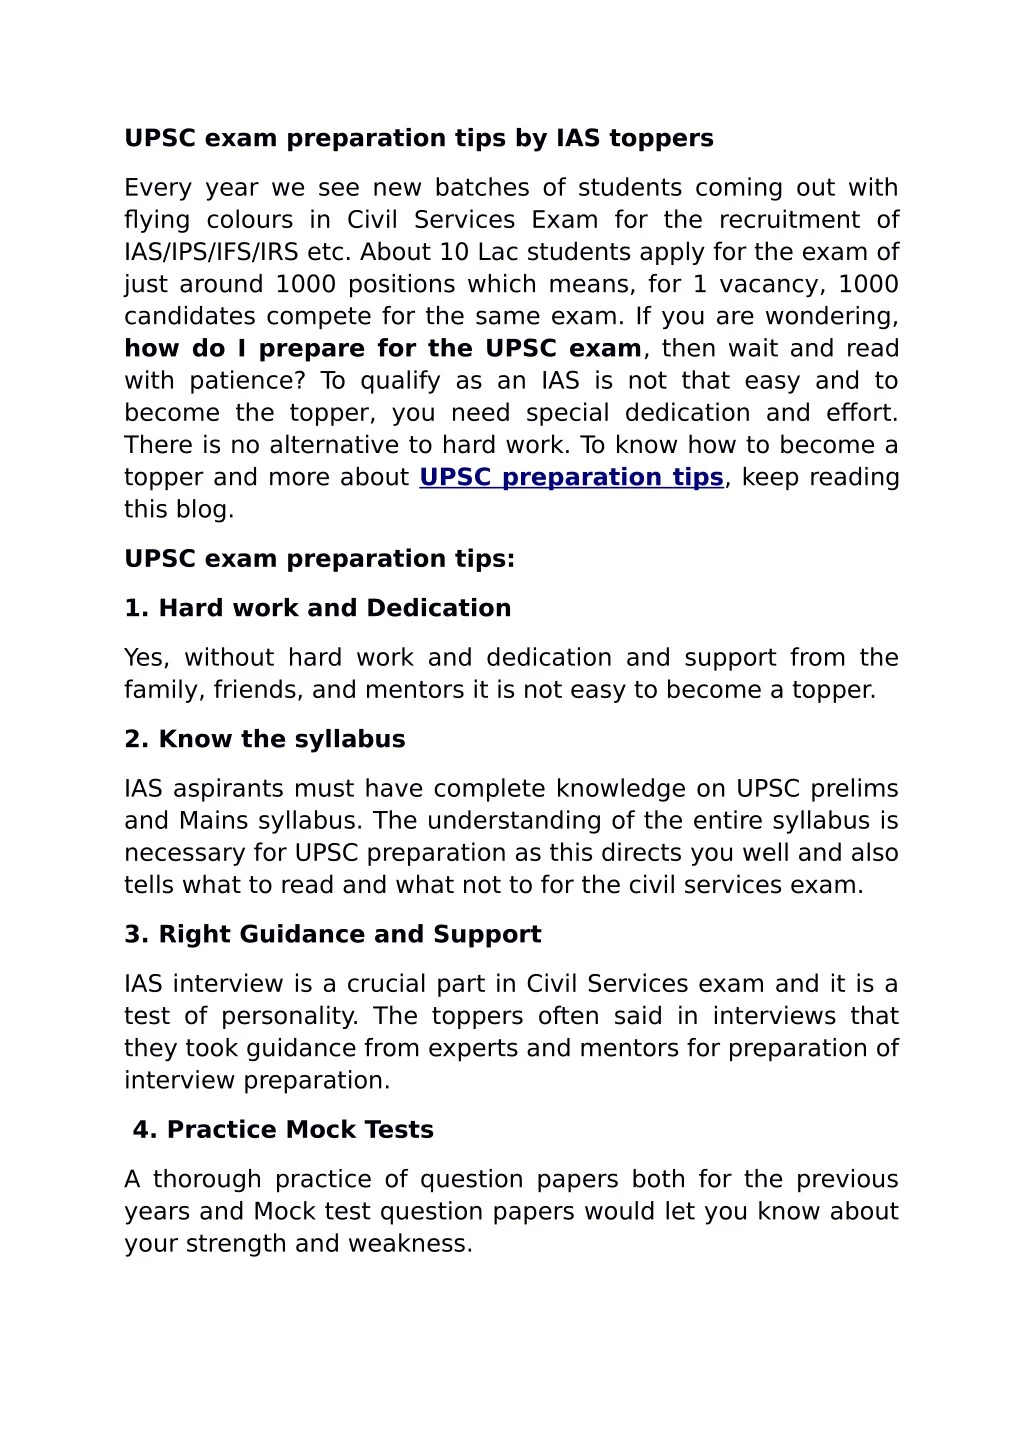 upsc exam preparation tips by ias toppers n.